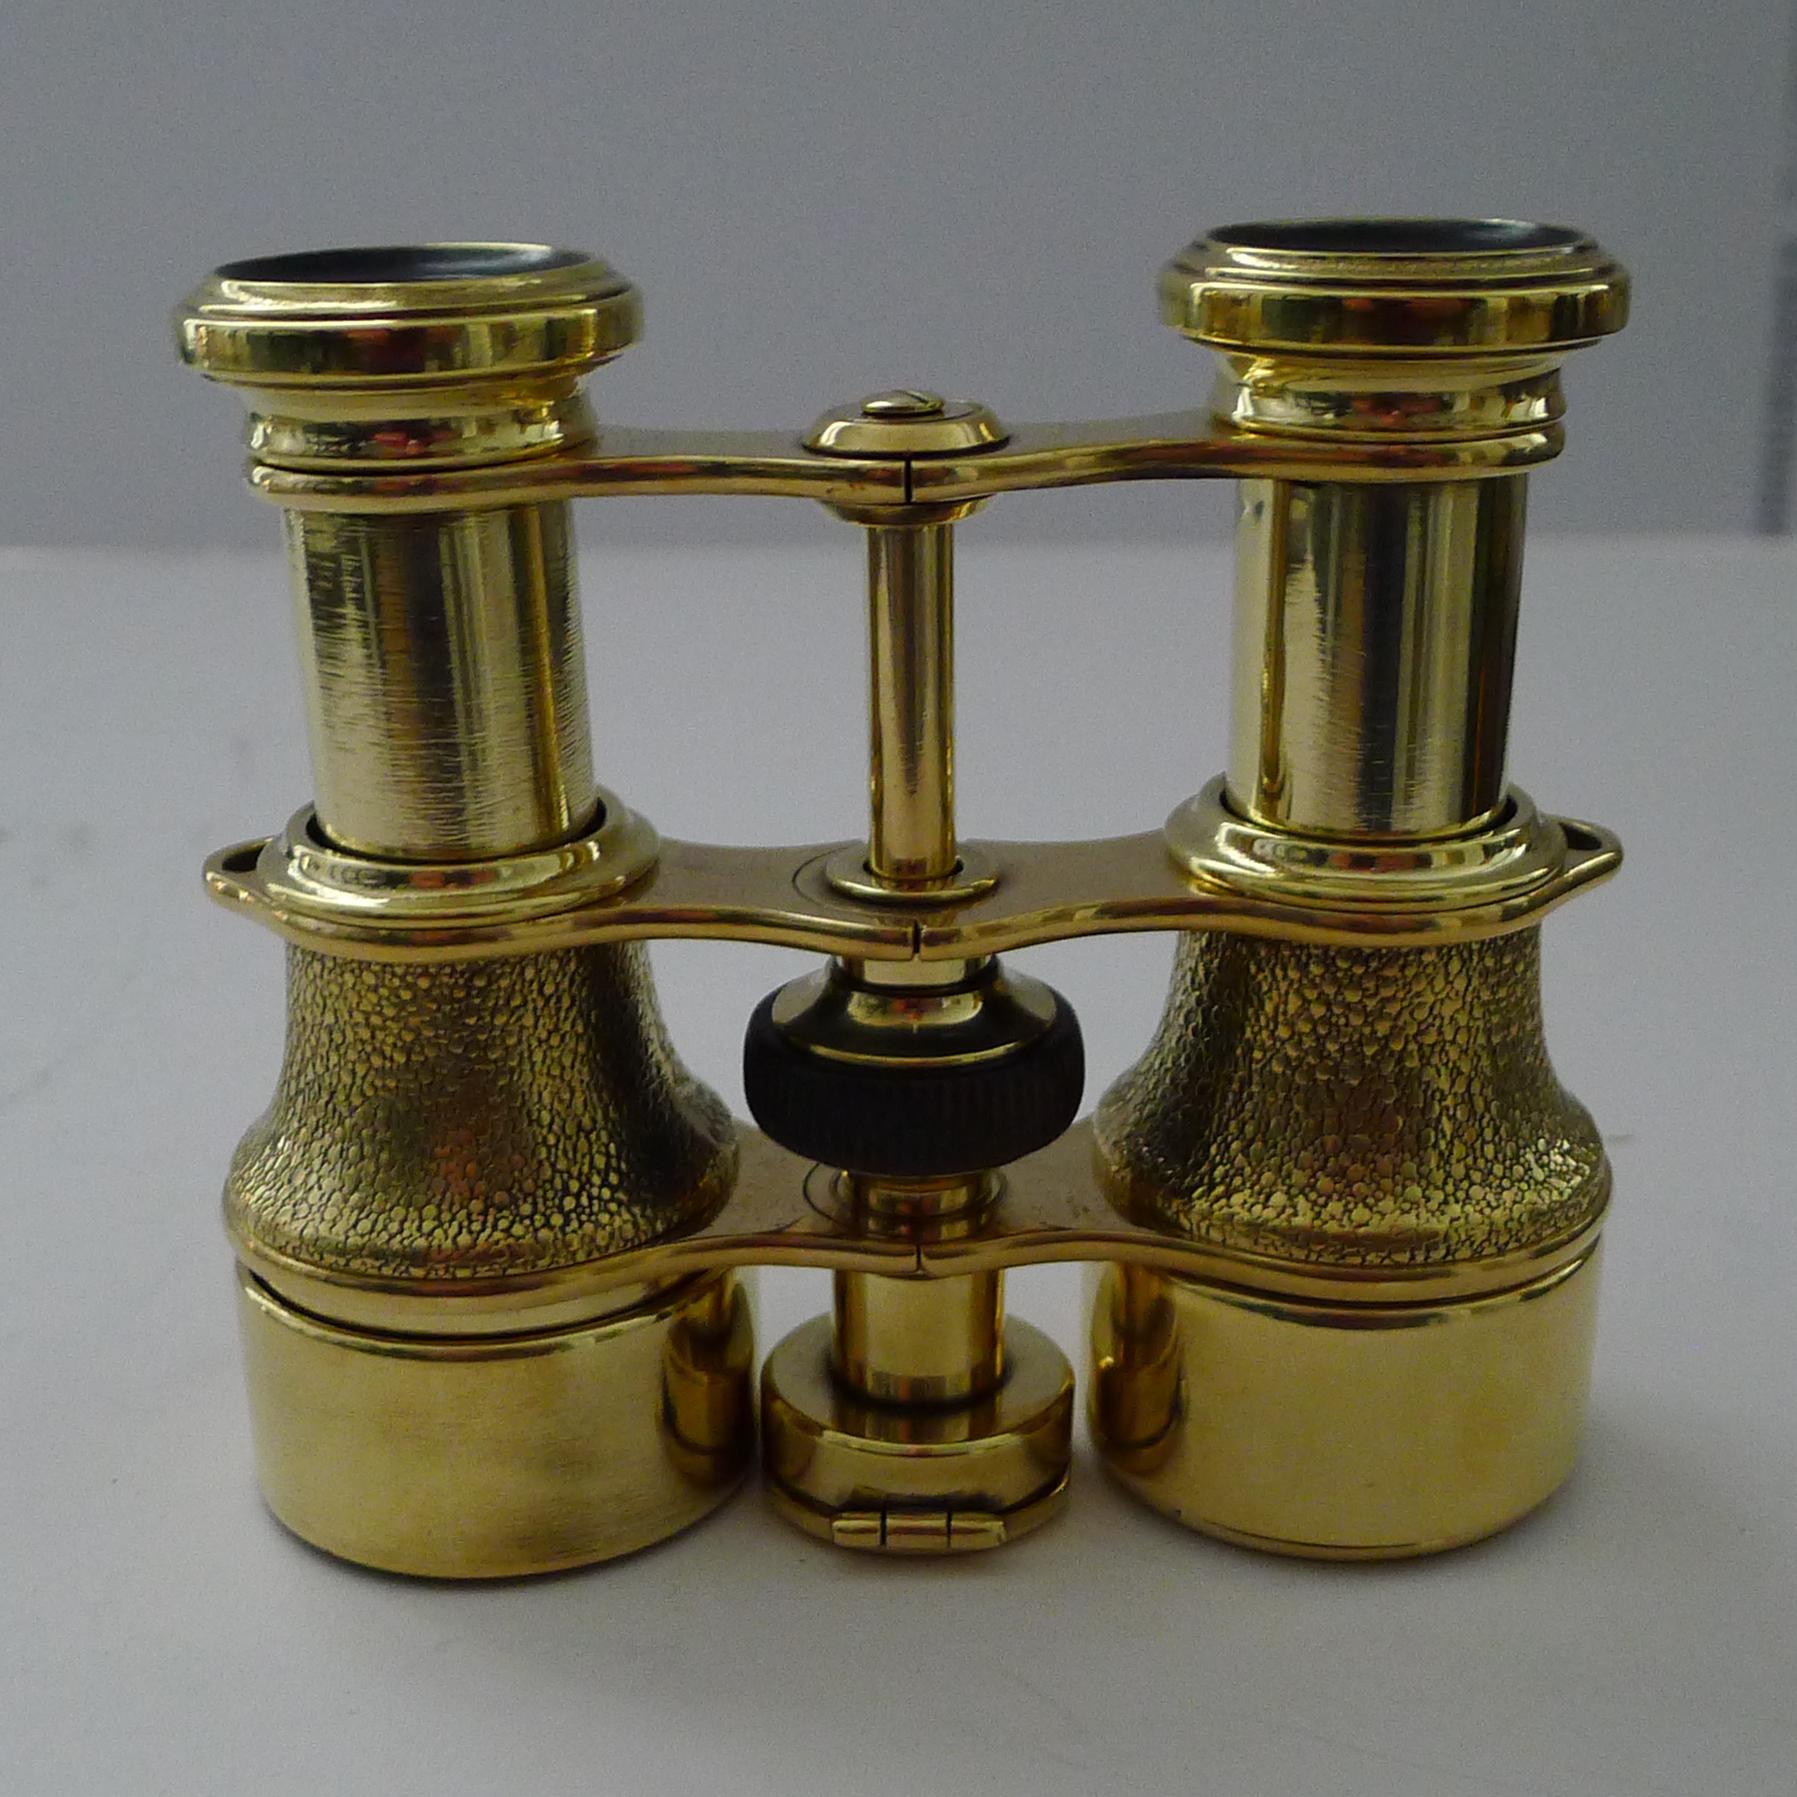 Brass Antique English Field Glasses / Binoculars by Lawrence and Mayo - With Compass For Sale